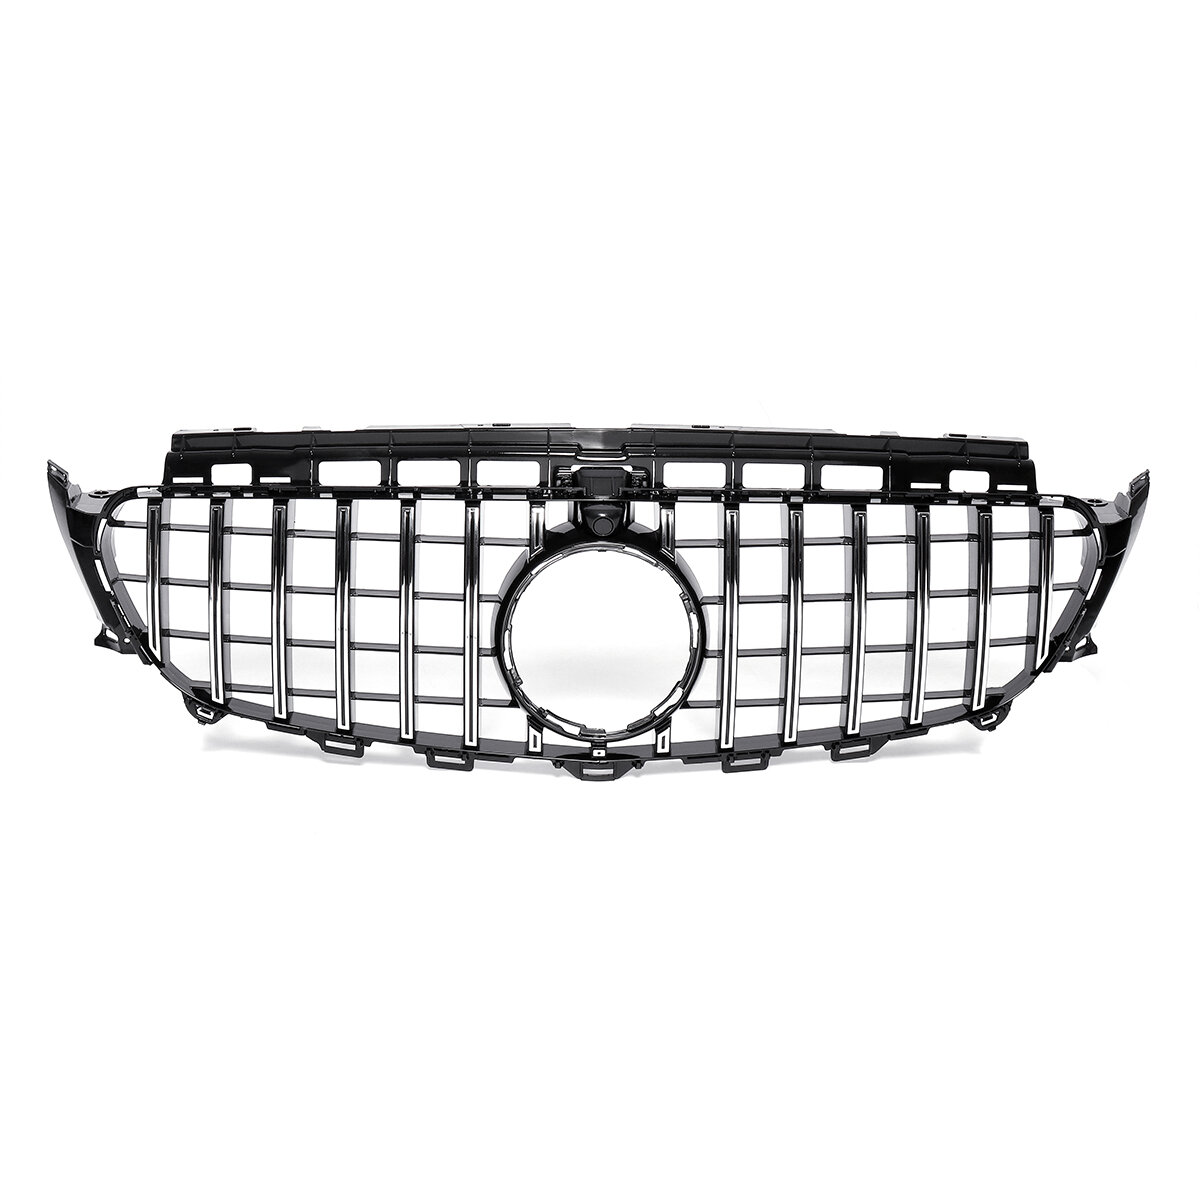 Image of Front Grille For Mercedes Benz W213 E-Class Black 2016-2018 AMG GT R Look Grill